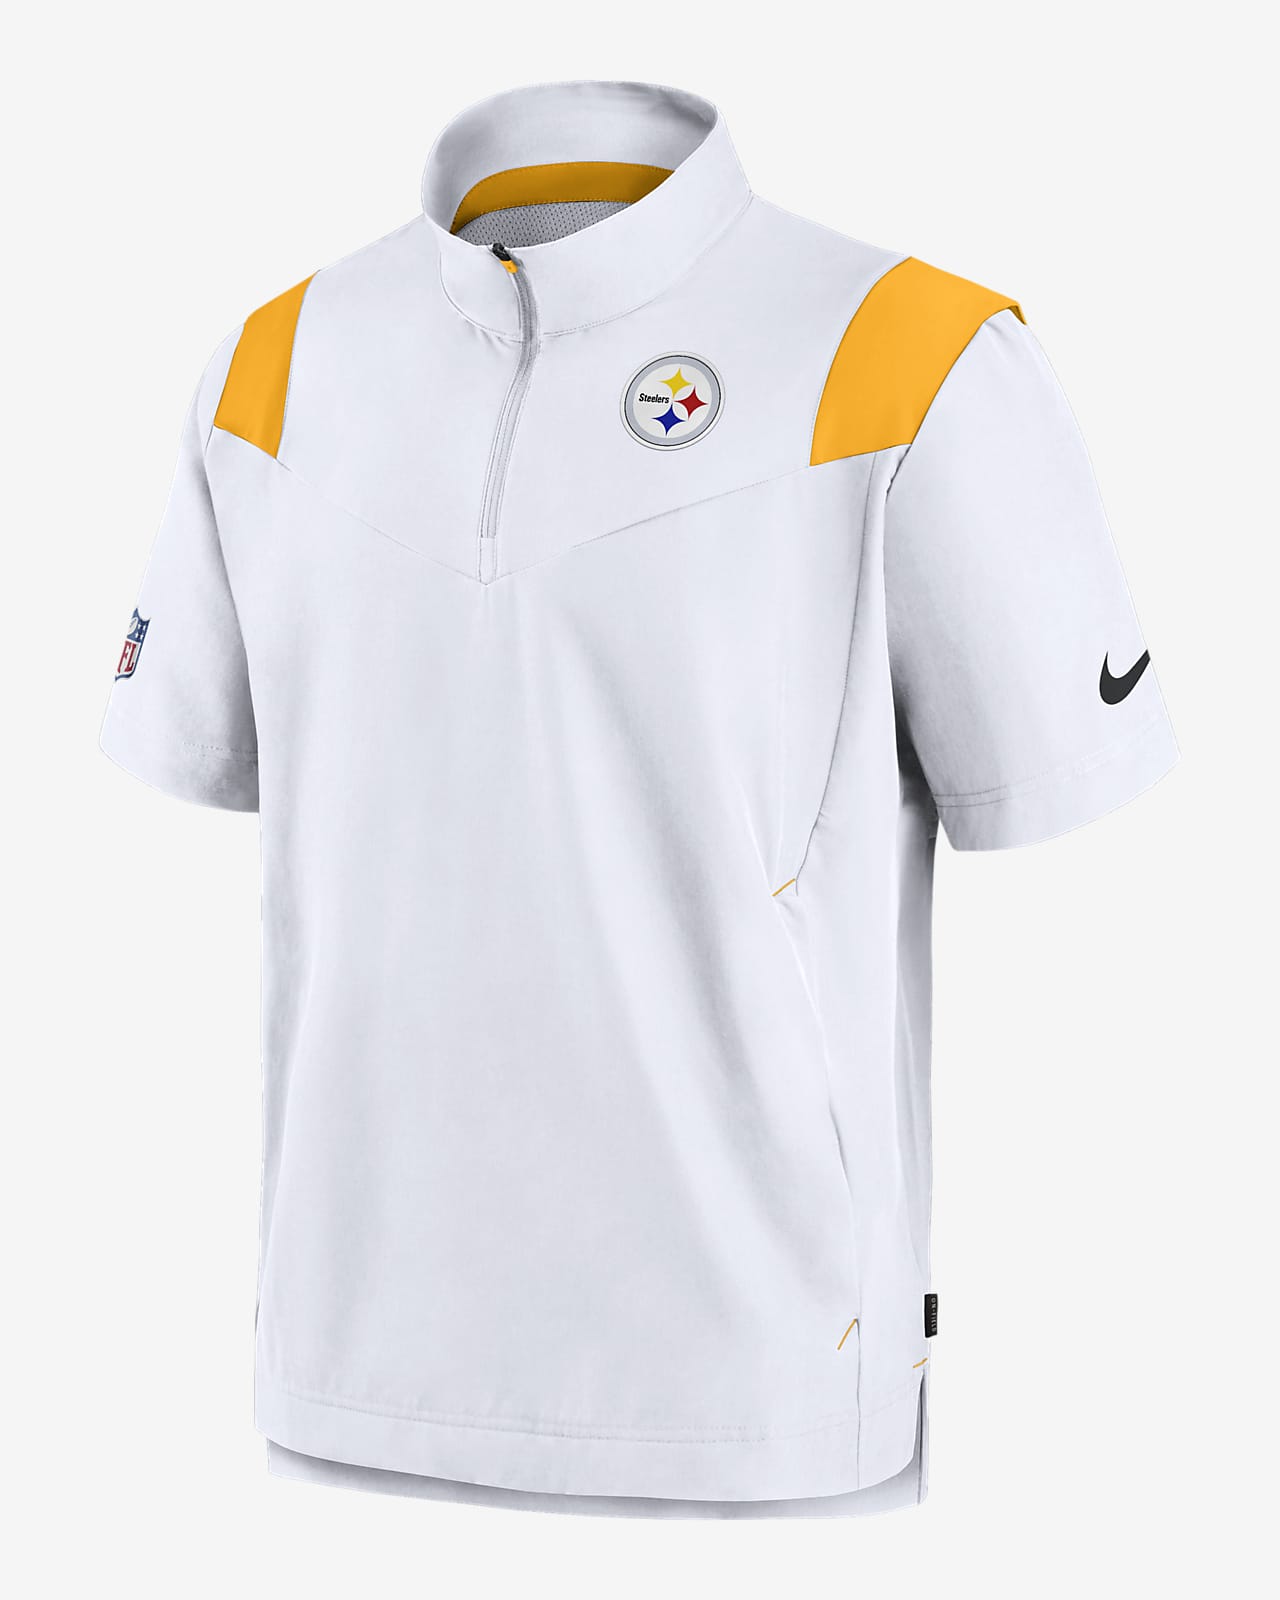 pittsburgh steelers big and tall jackets